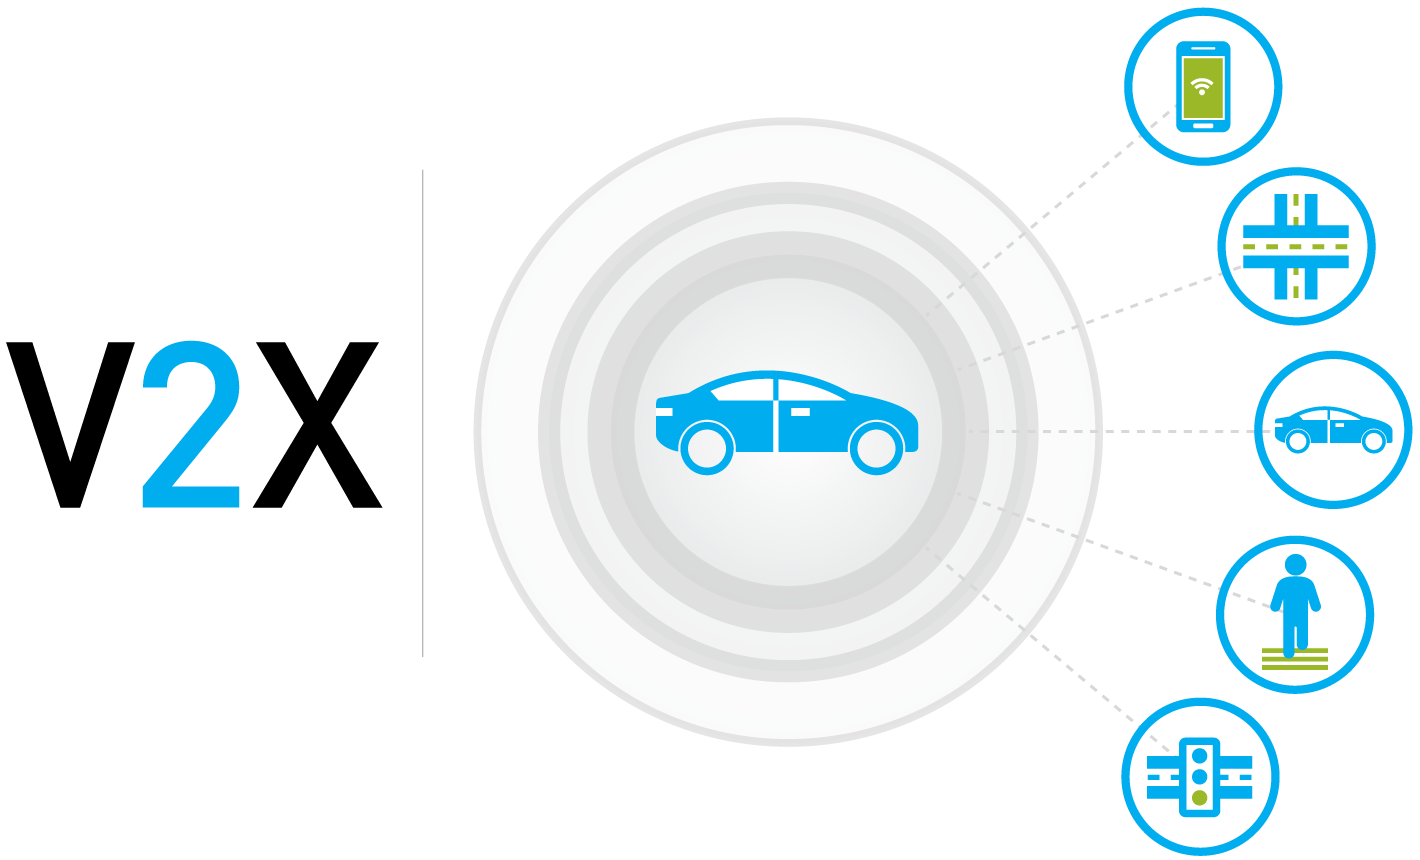 Vehicle-to-everything (V2X) technology connects vehicles, infrastructure and roadway operators